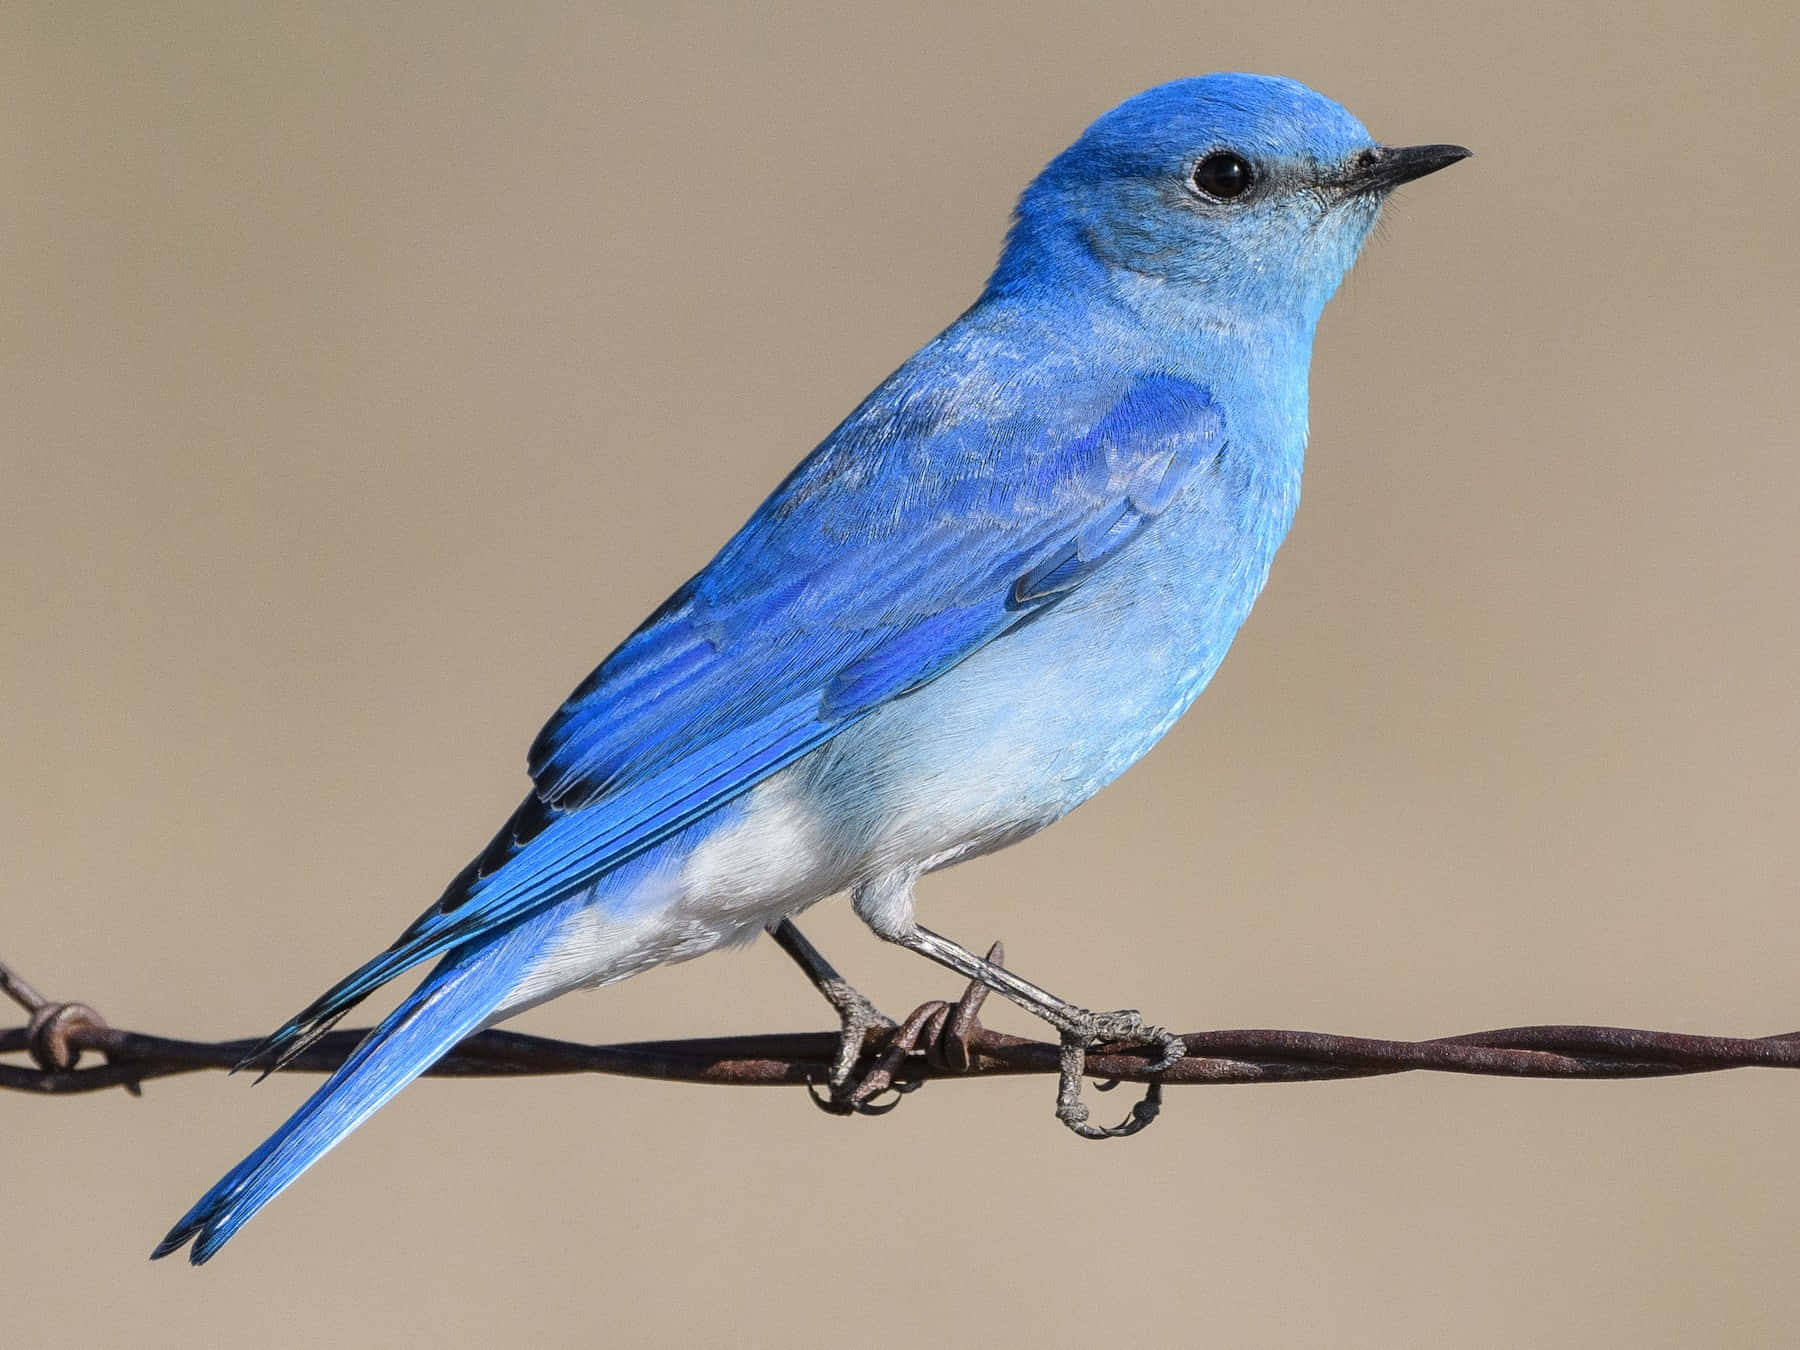 A majestic Bluebird perched atop a tree branch.